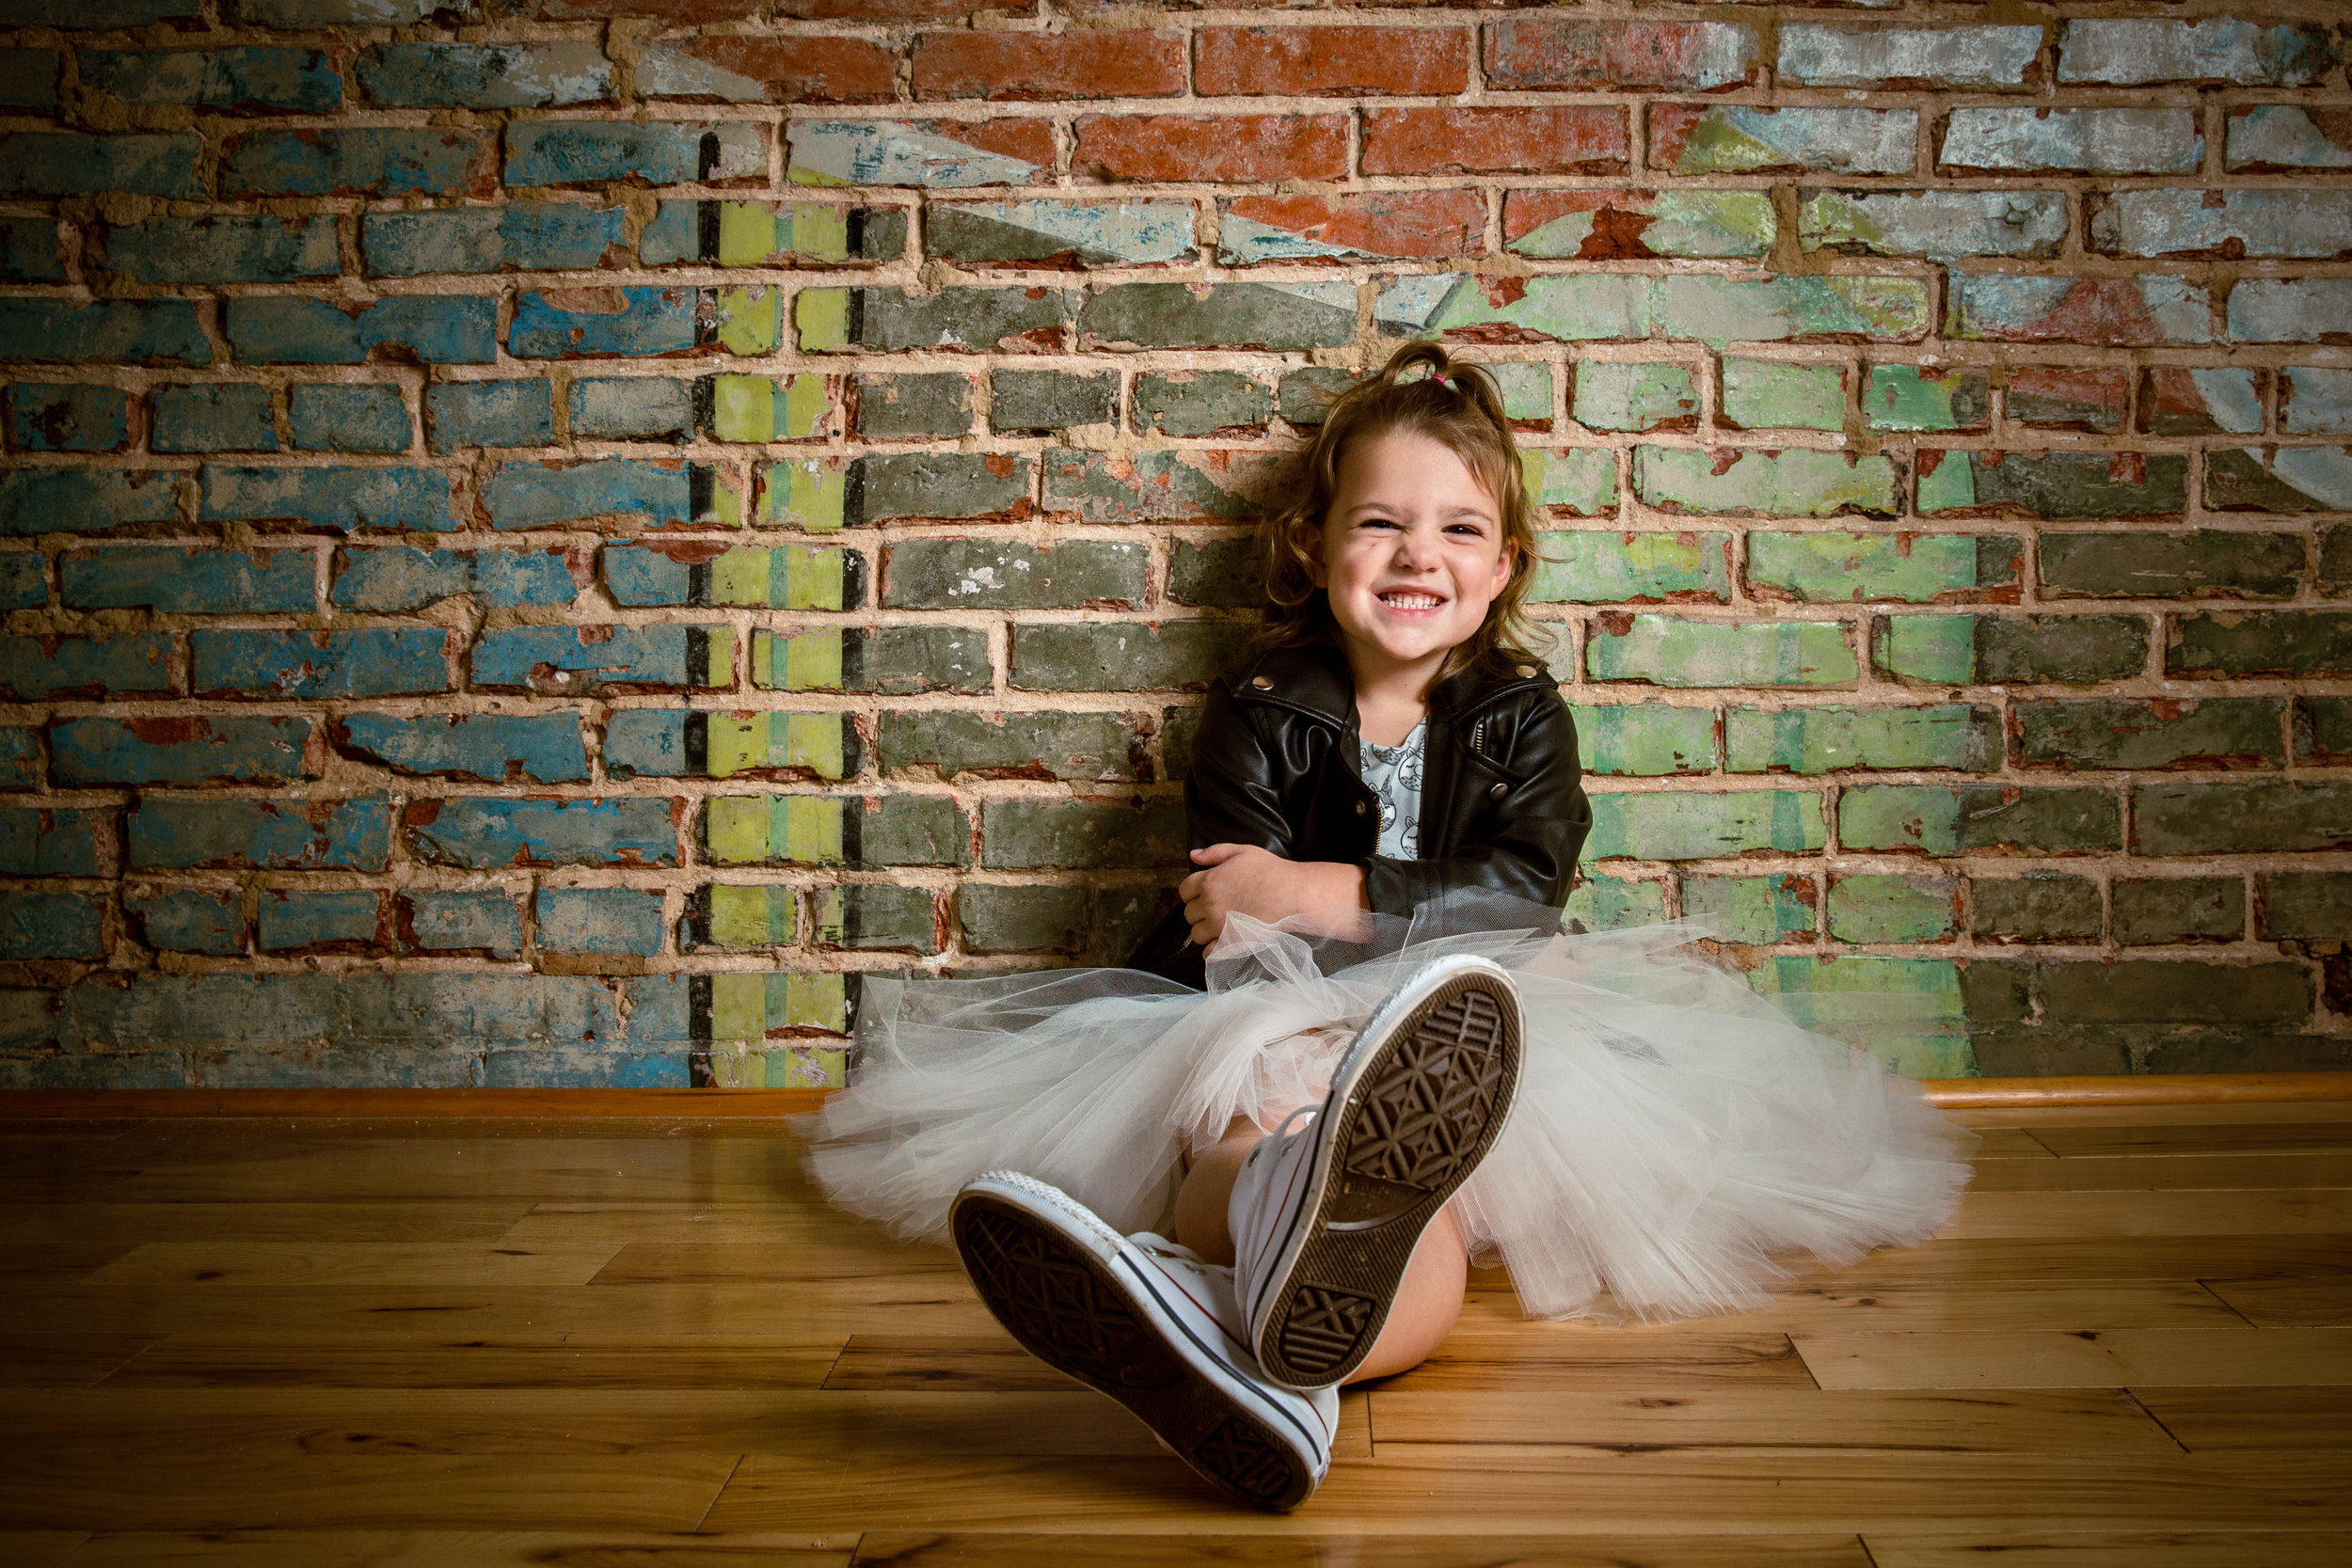 smiling little girl sits against brick wall wearing skirt and jacket, with sneakers on feet and legs crossed.